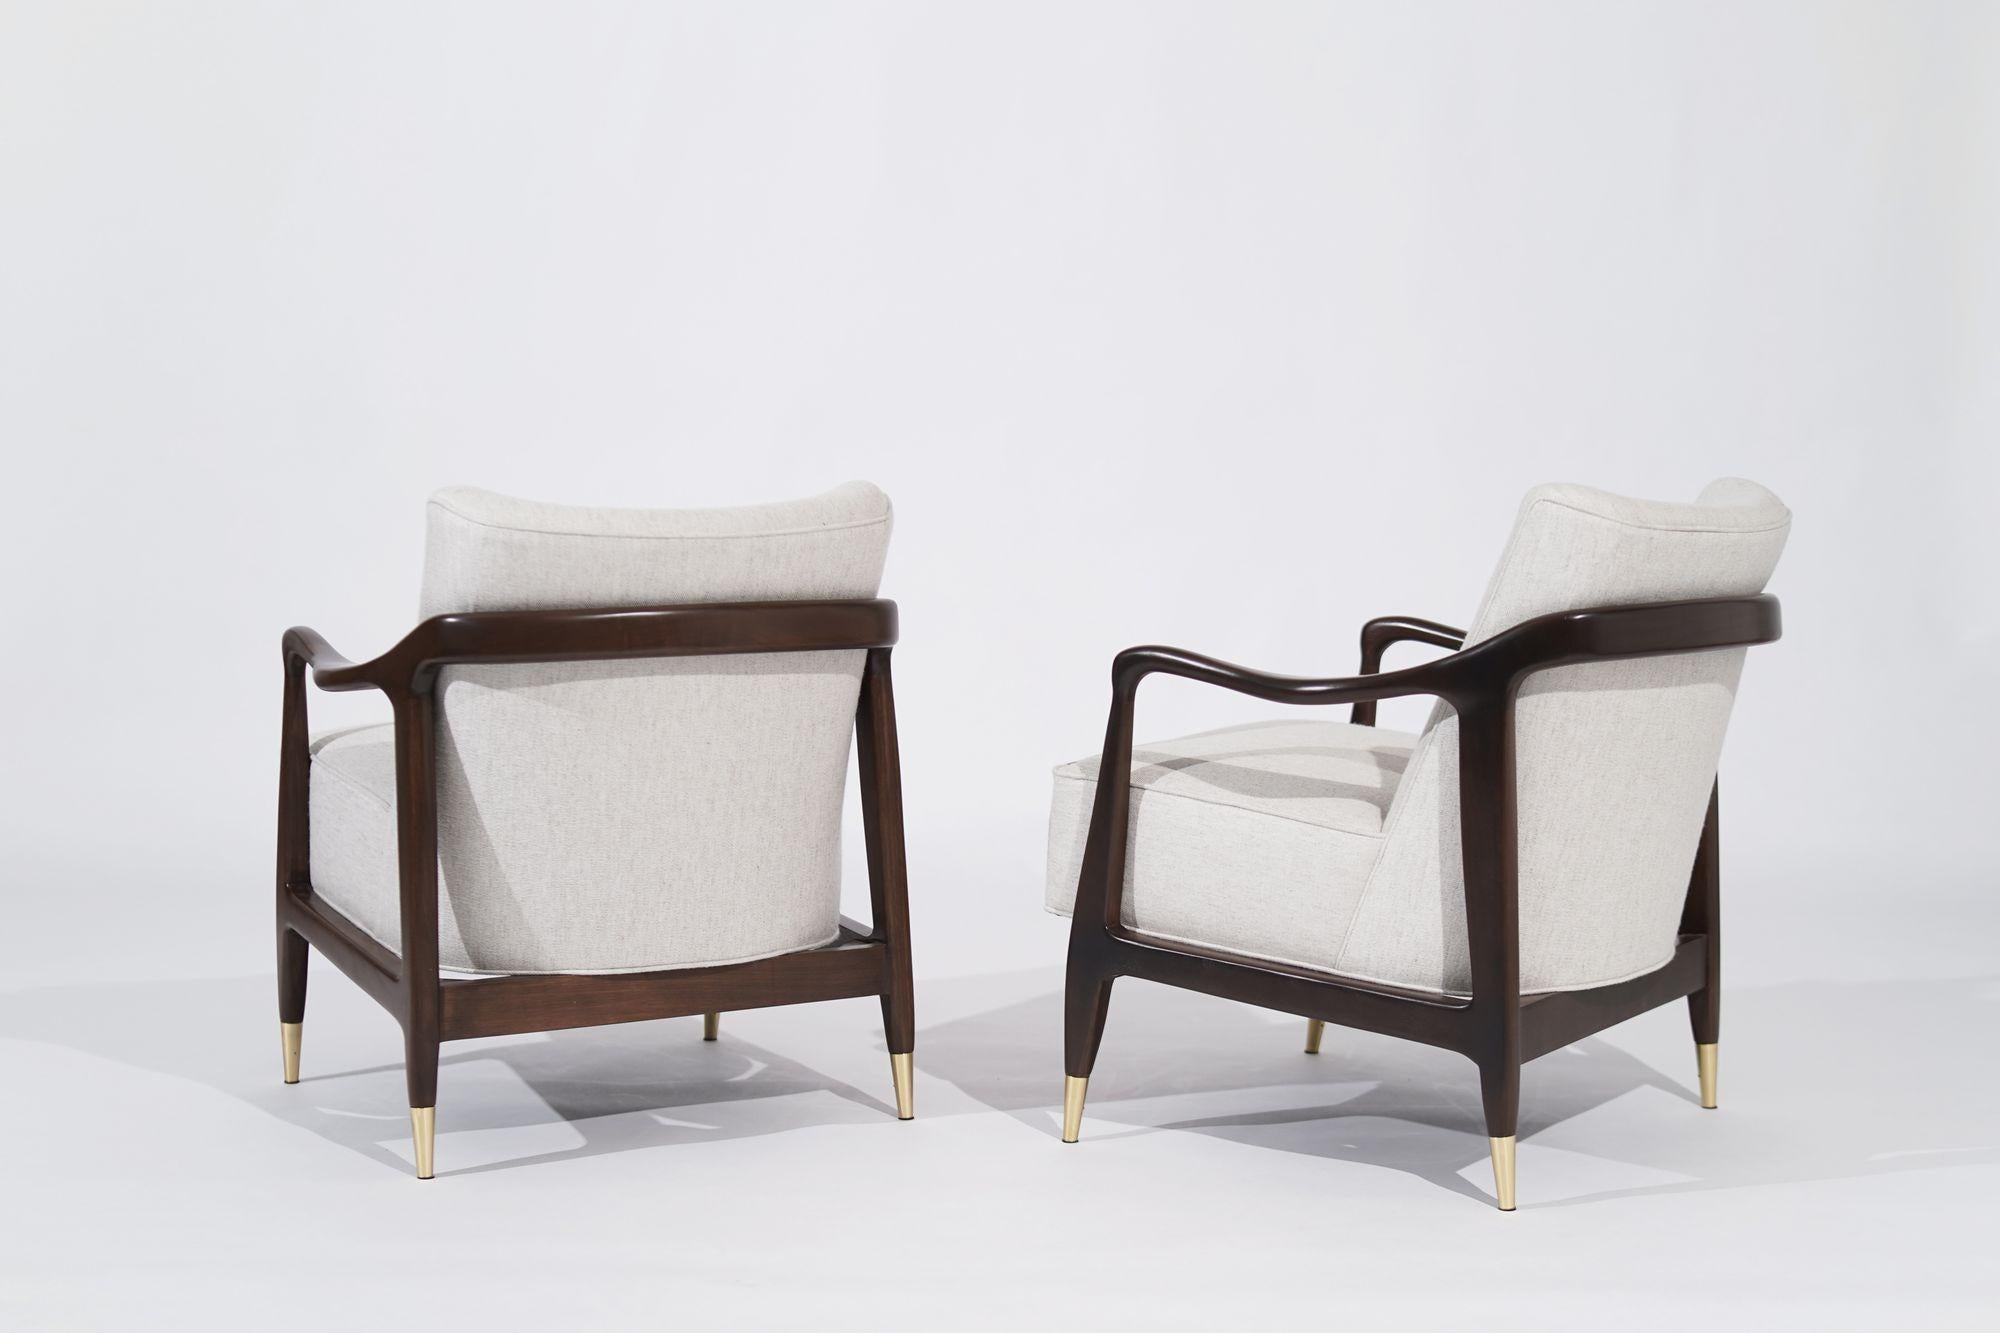 American Set of Sculptural Walnut Lounge Chairs in the Style of Gio Ponti, C. 1950s